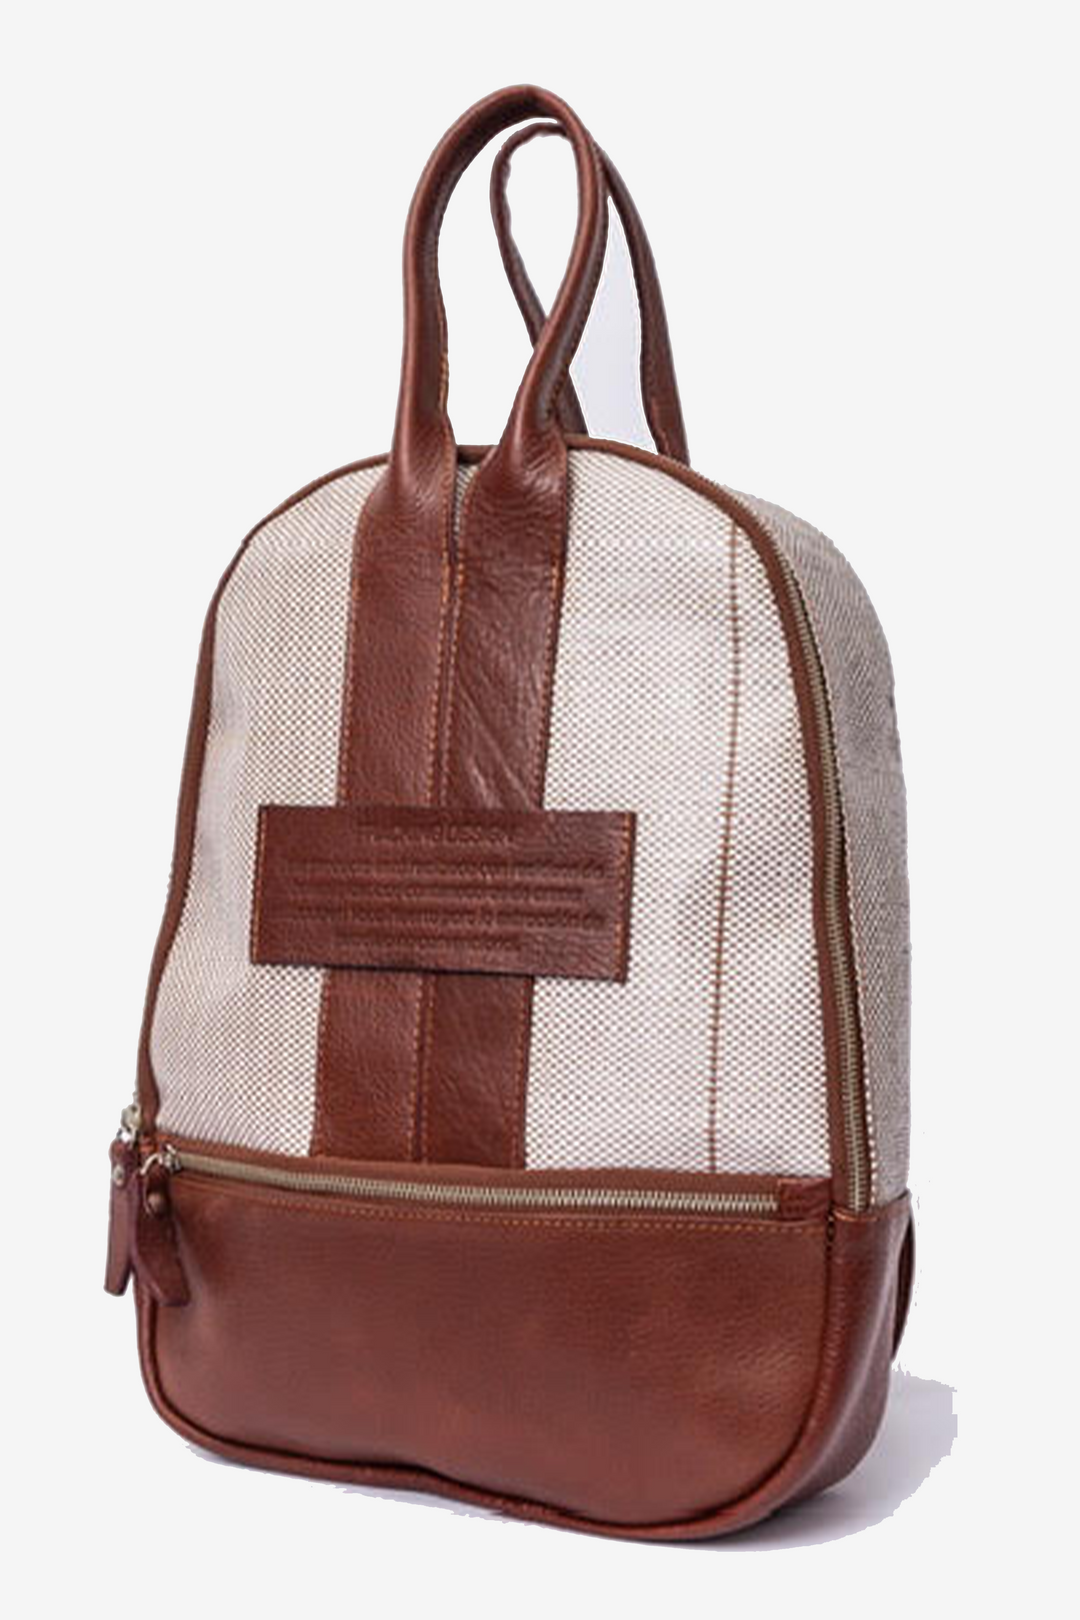 Hand Matters. Fortin sustainable backpack